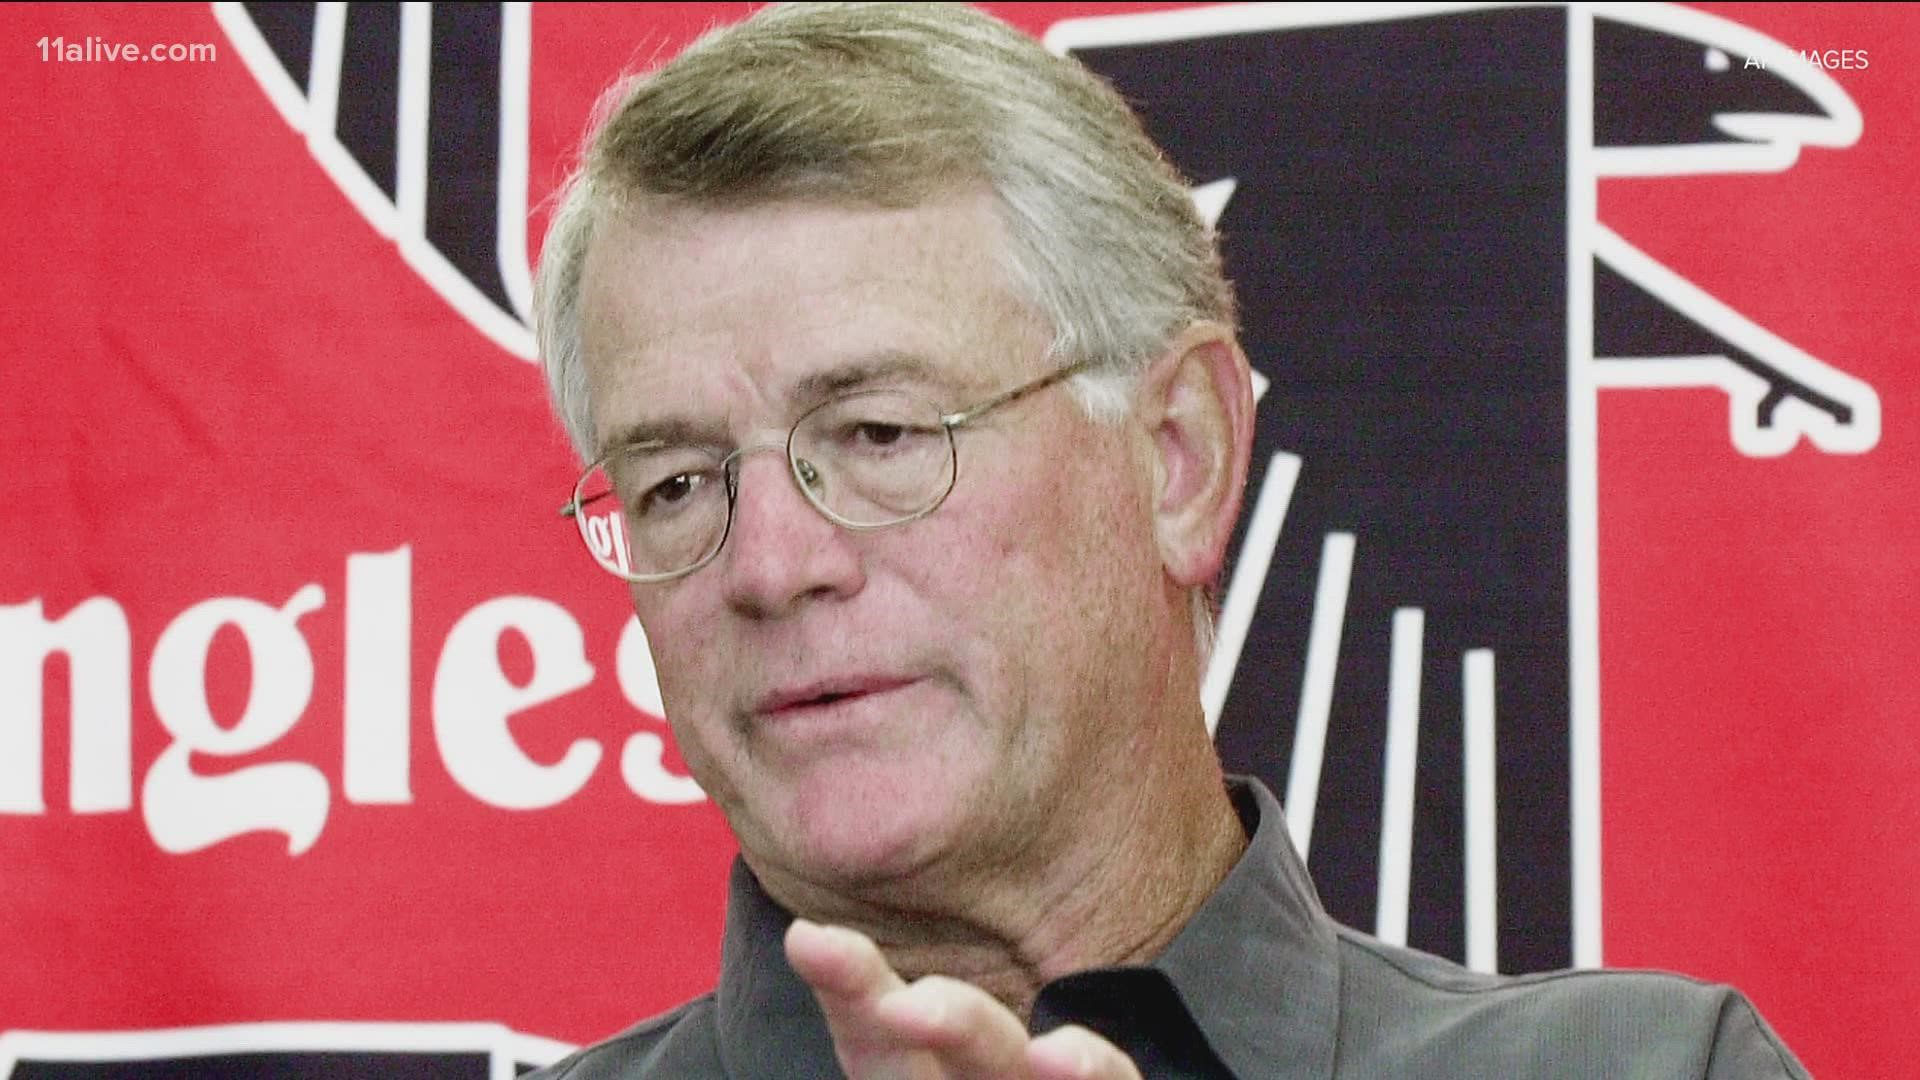 Reeves, who guided the Falcons to their first Super Bowl appearance, died on Saturday at 77.